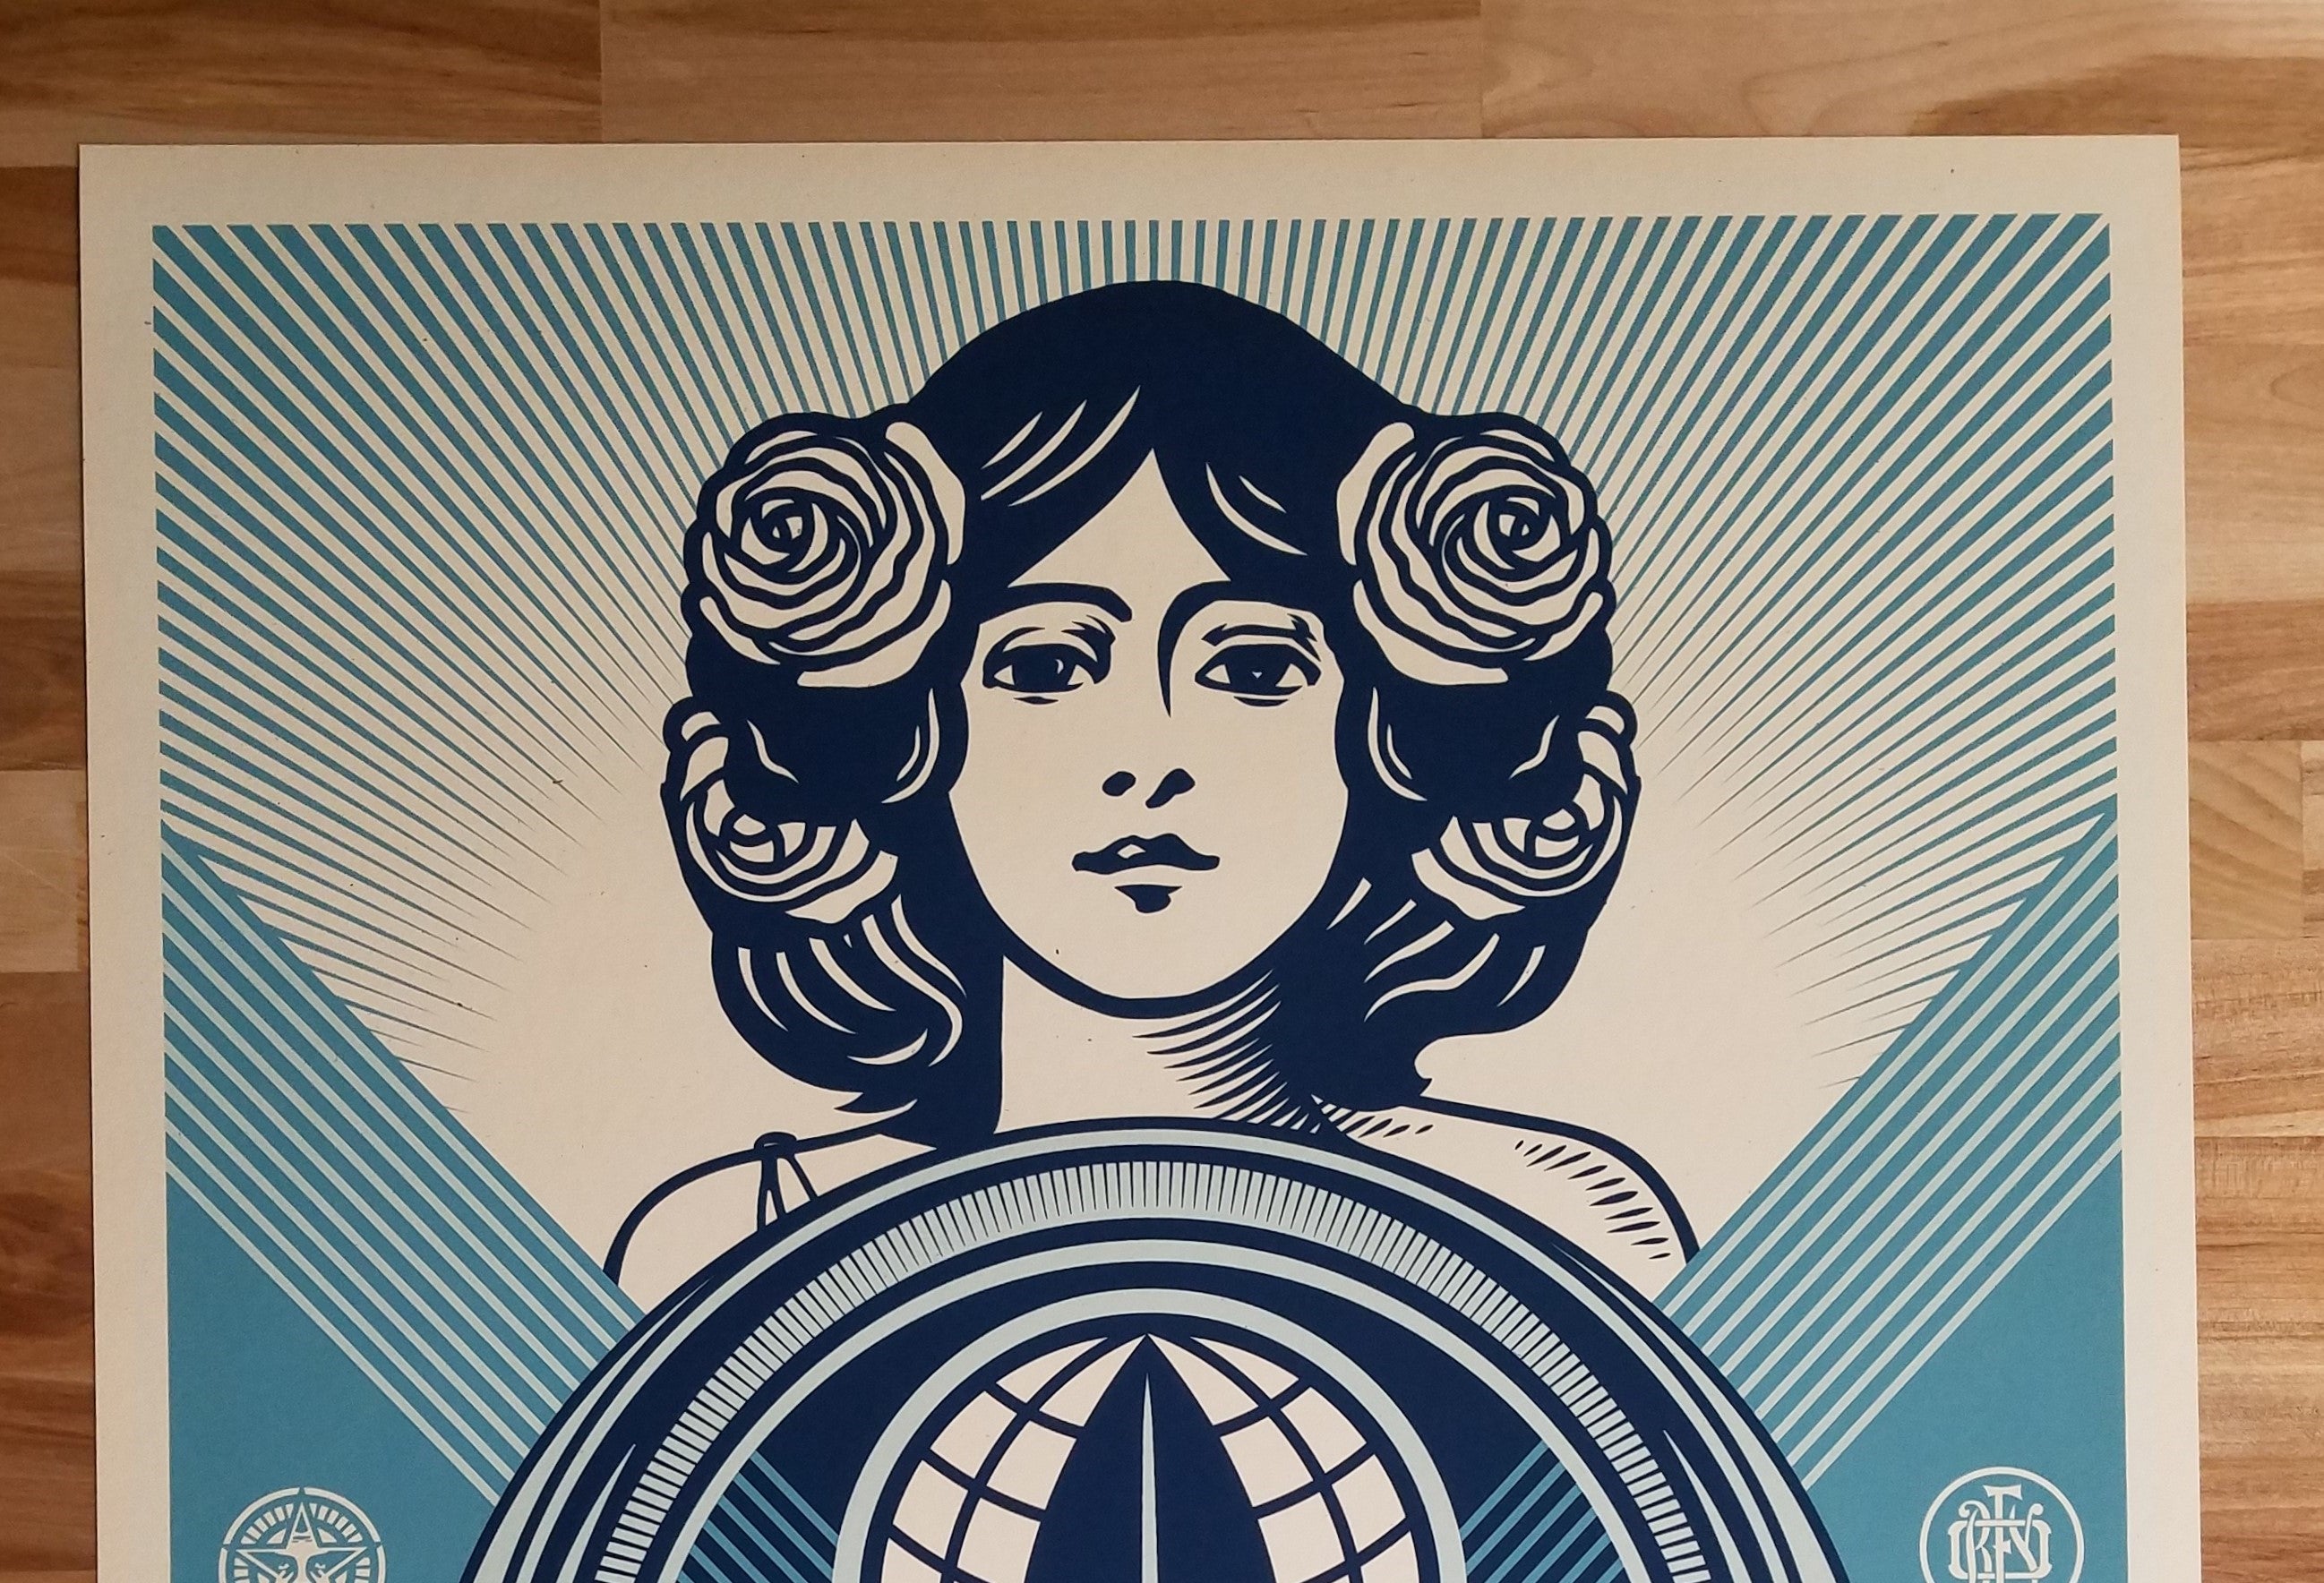 Title: Protect Biodiversity - Cultivate Harmony - 2021  Artist: Shepard Fairey  Edition: Limited Edition Screenprint Poster xx/500, signed and numbered by the artist  Type: OBEY Giant Screen Print poster  Size: 18" x 24"